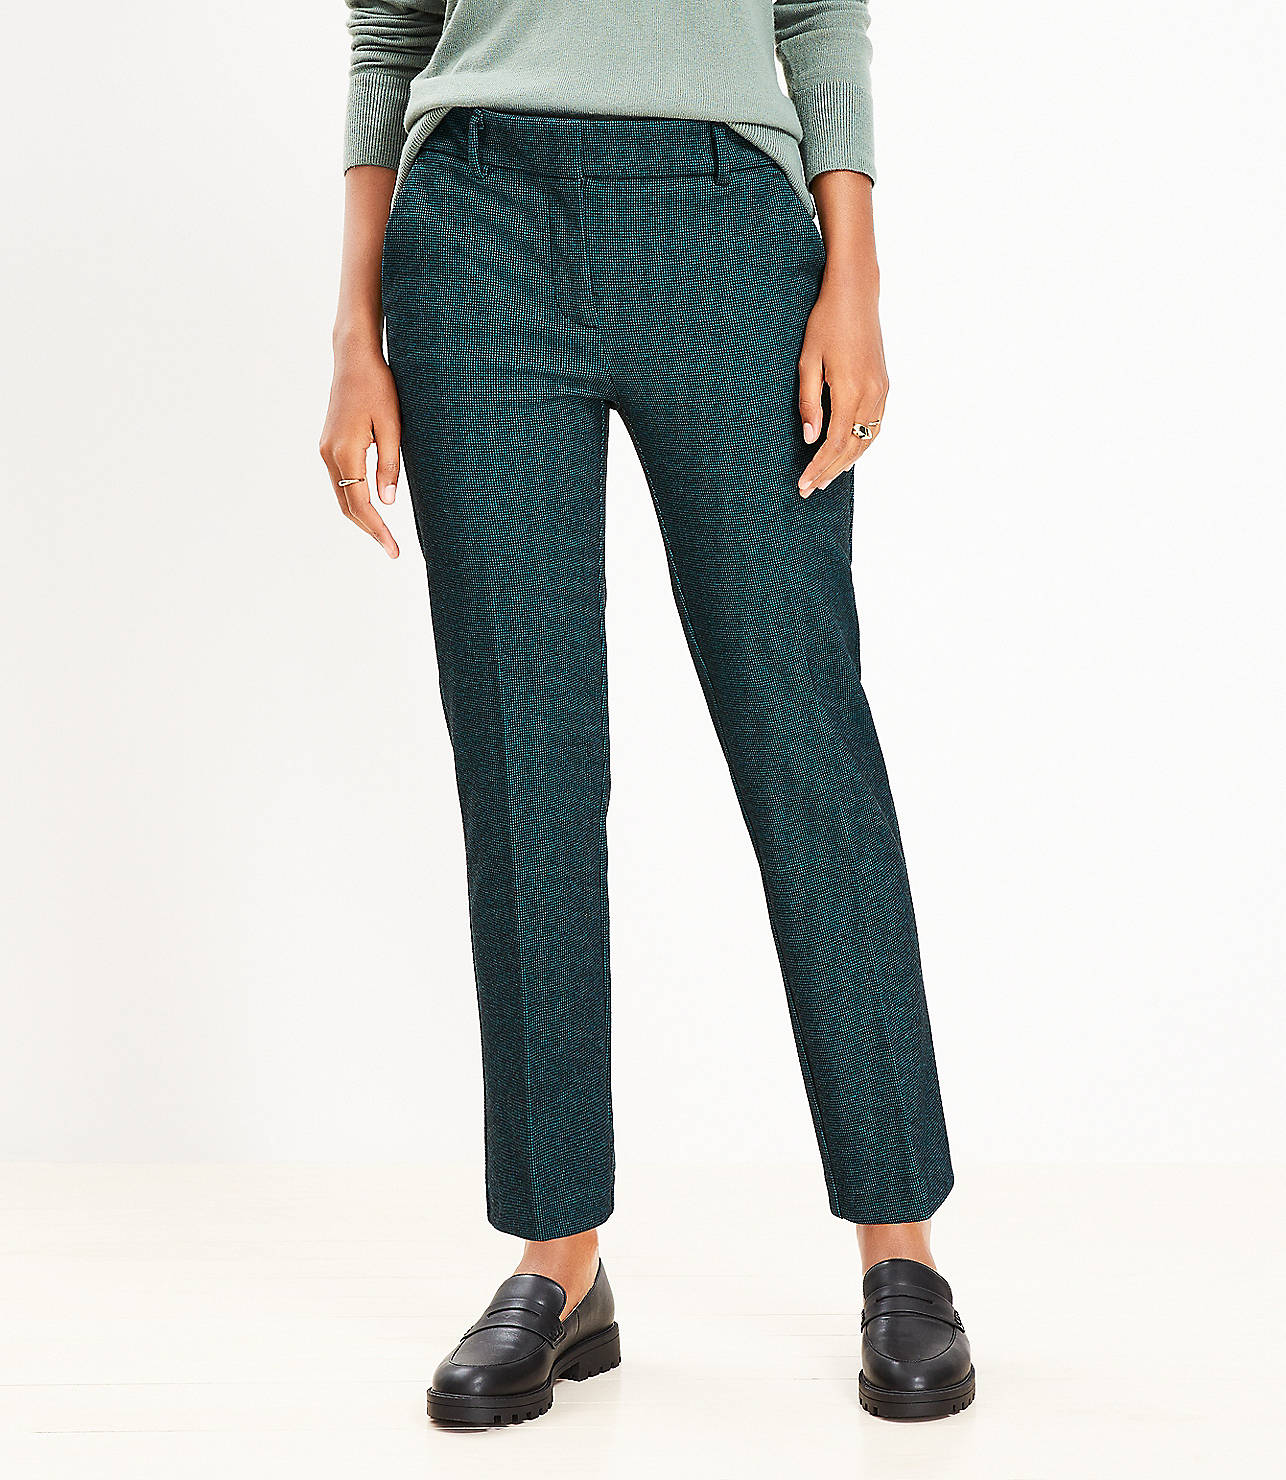 Riviera Slim Pants in Brushed Houndstooth